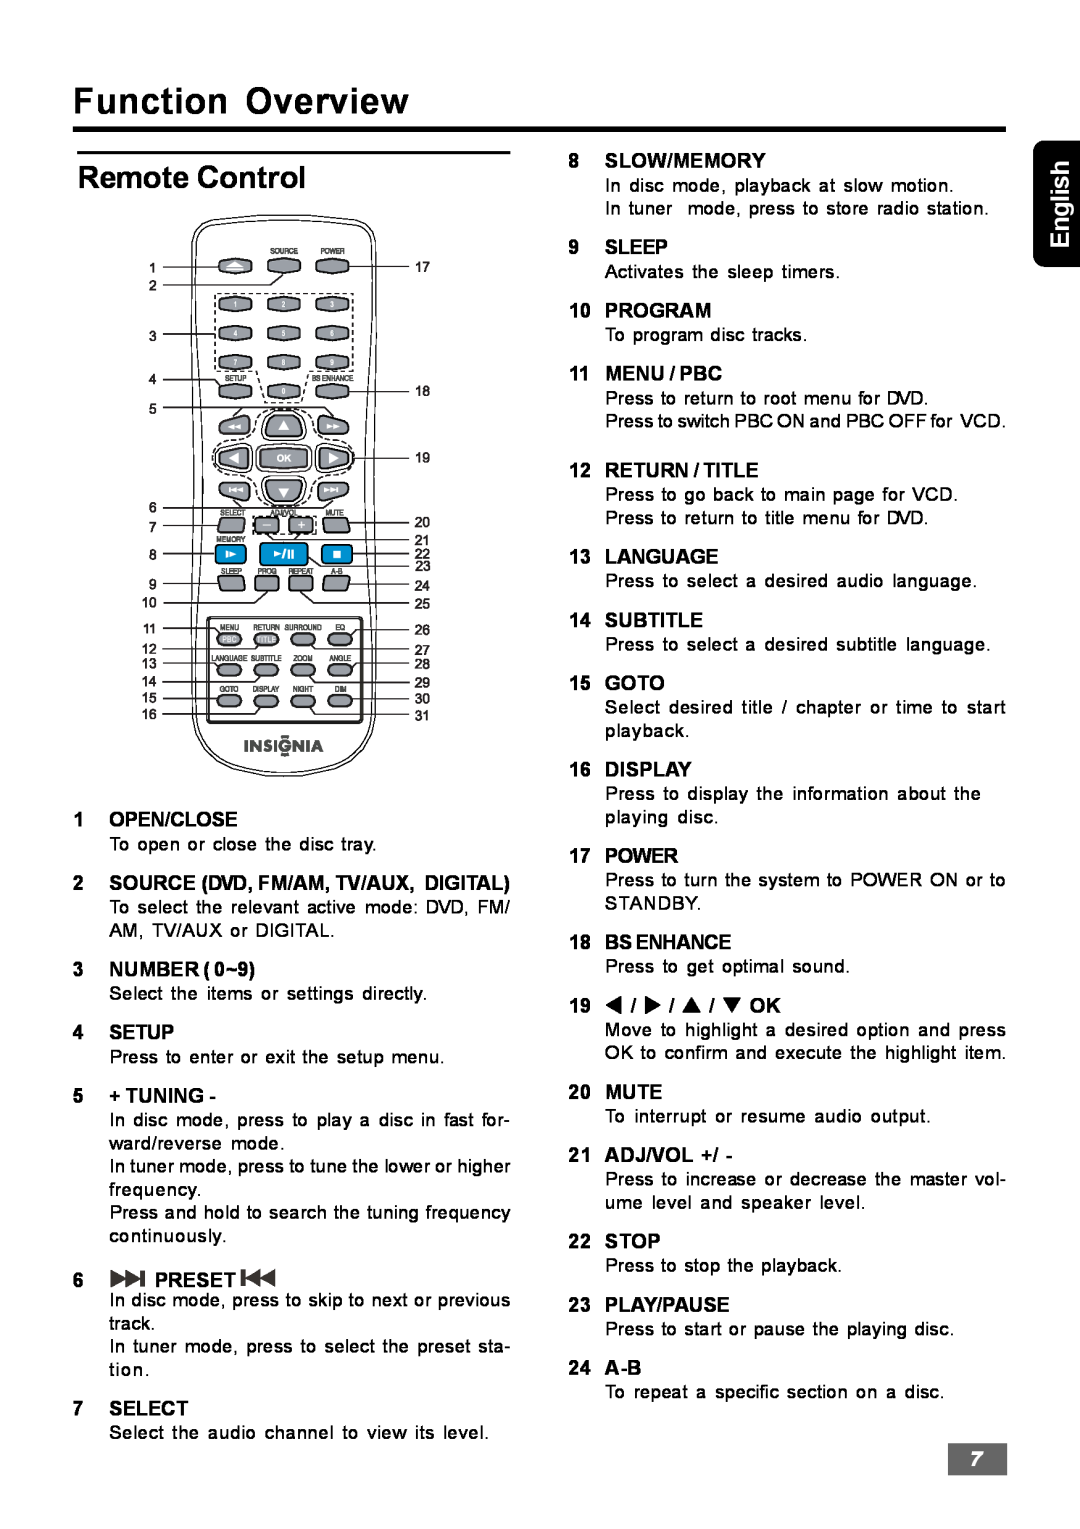 Insignia IS-HTIB102731 owner manual Remote Control, Function Overview, English, 19t / u / p / q OK 